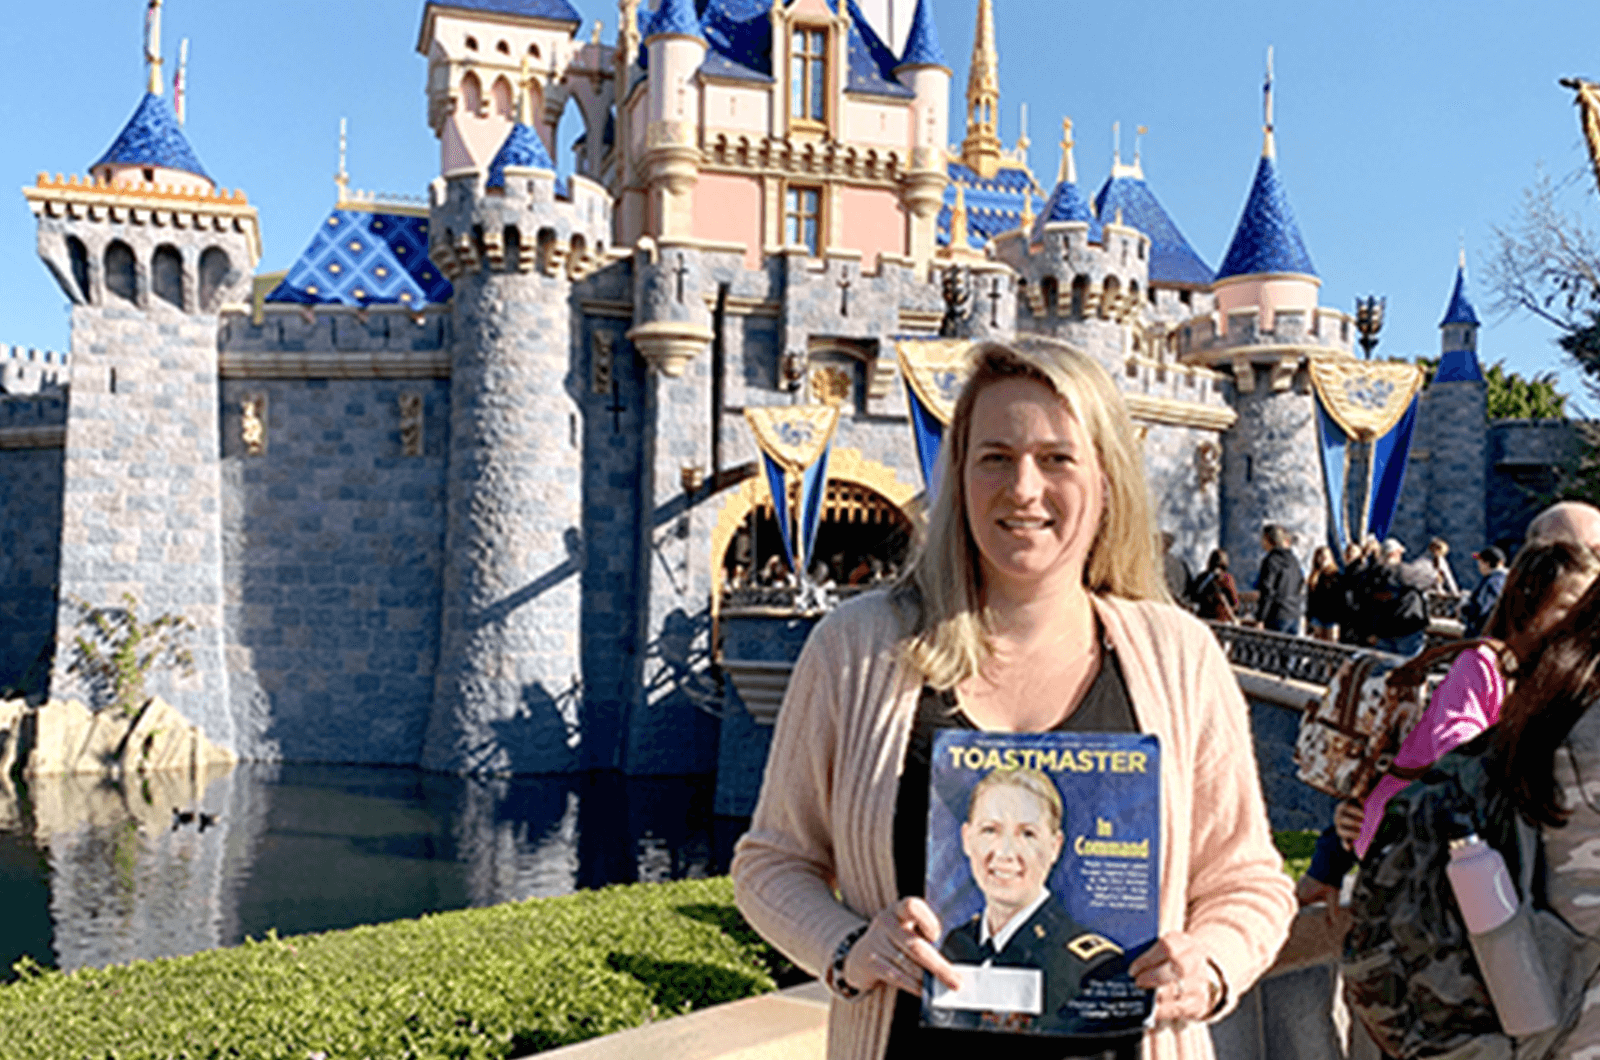 Kathryn Carrington of Brackendale, British Columbia, Canada, poses in front of the castle in Disneyland in Anaheim, California, U.S.